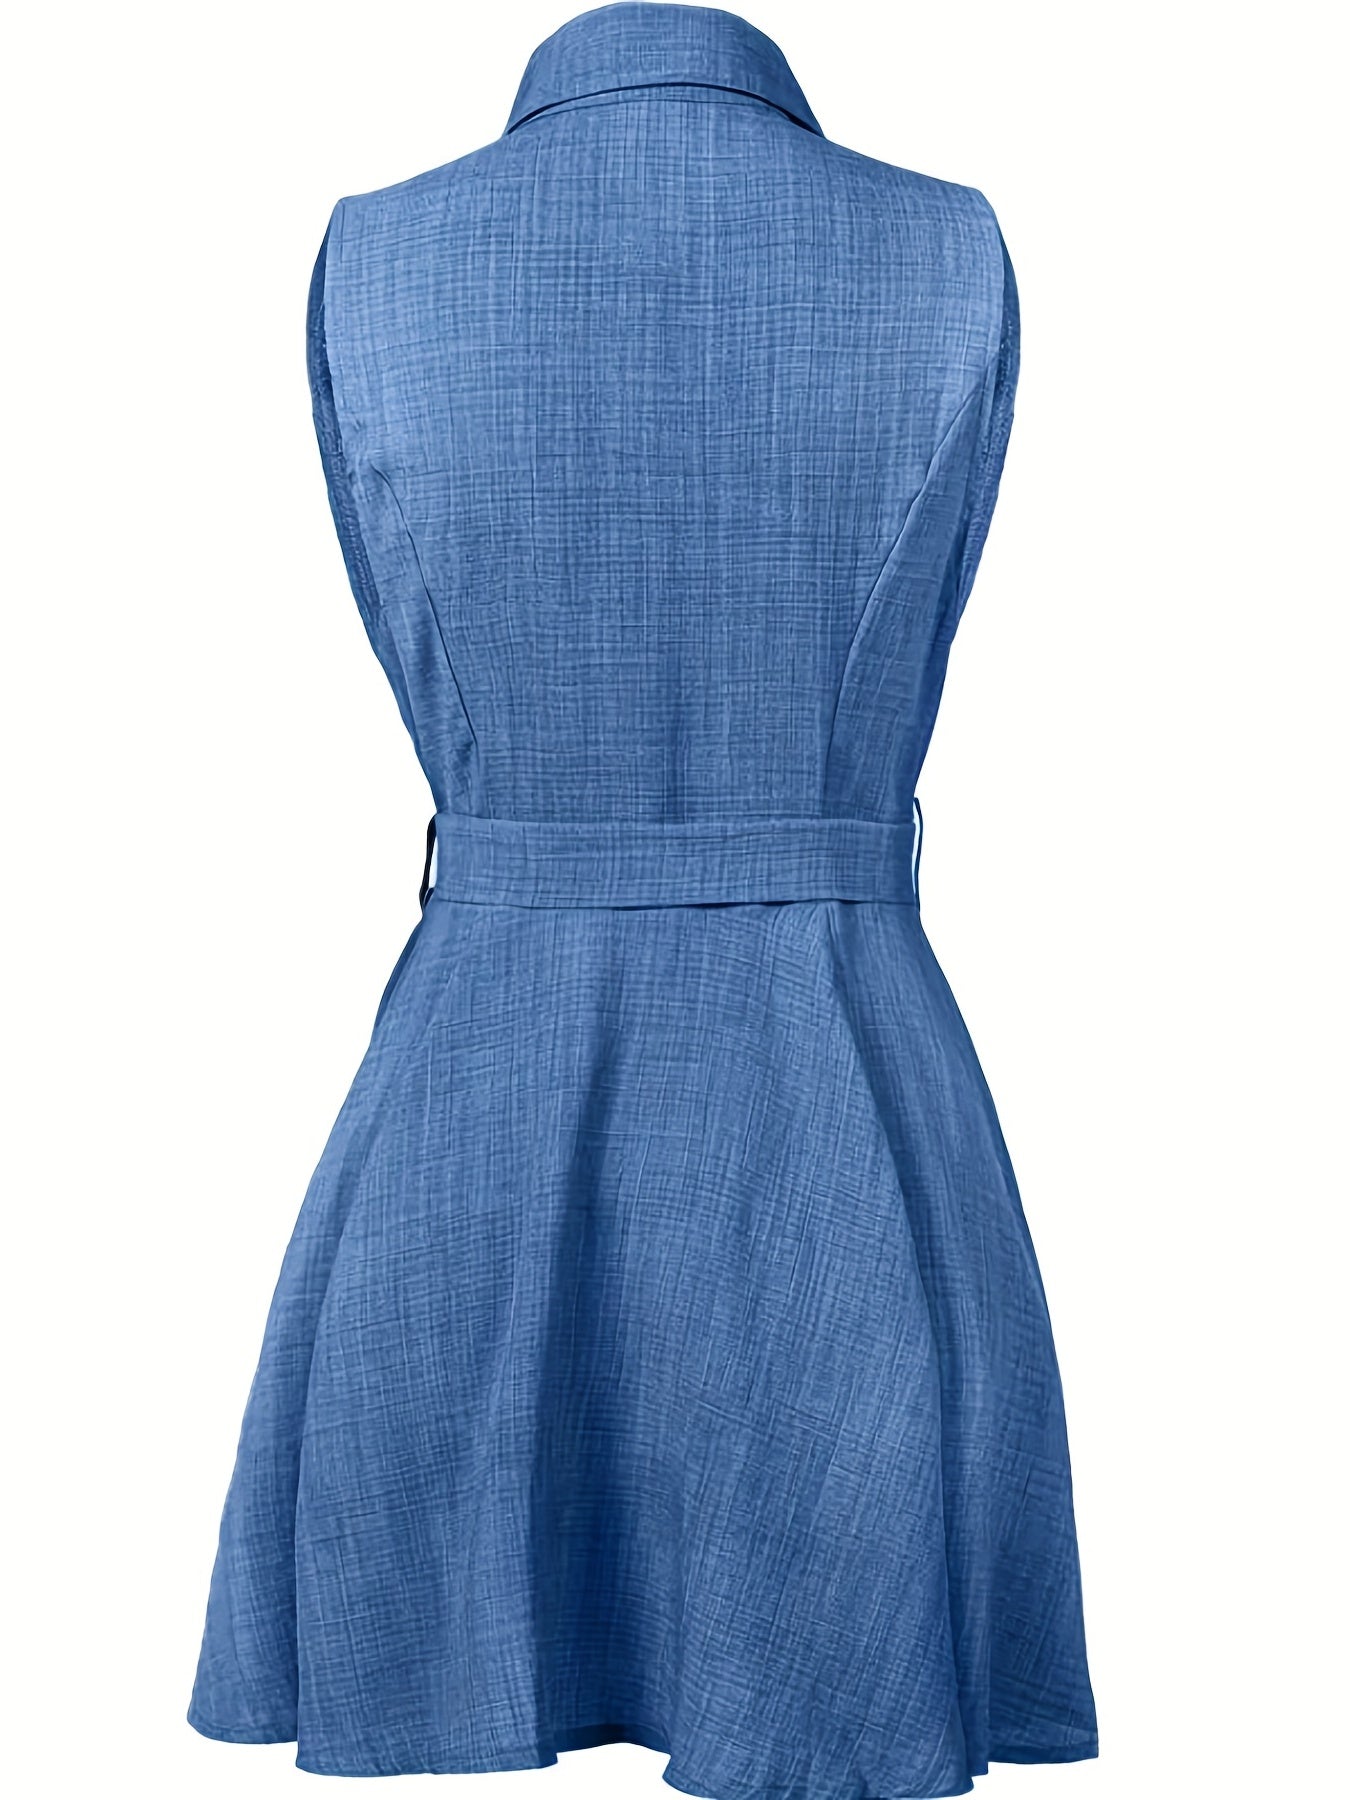 Button Front Sleeveless Dress, Casual Ruched Bodycon Mini Dress, Women's Clothing